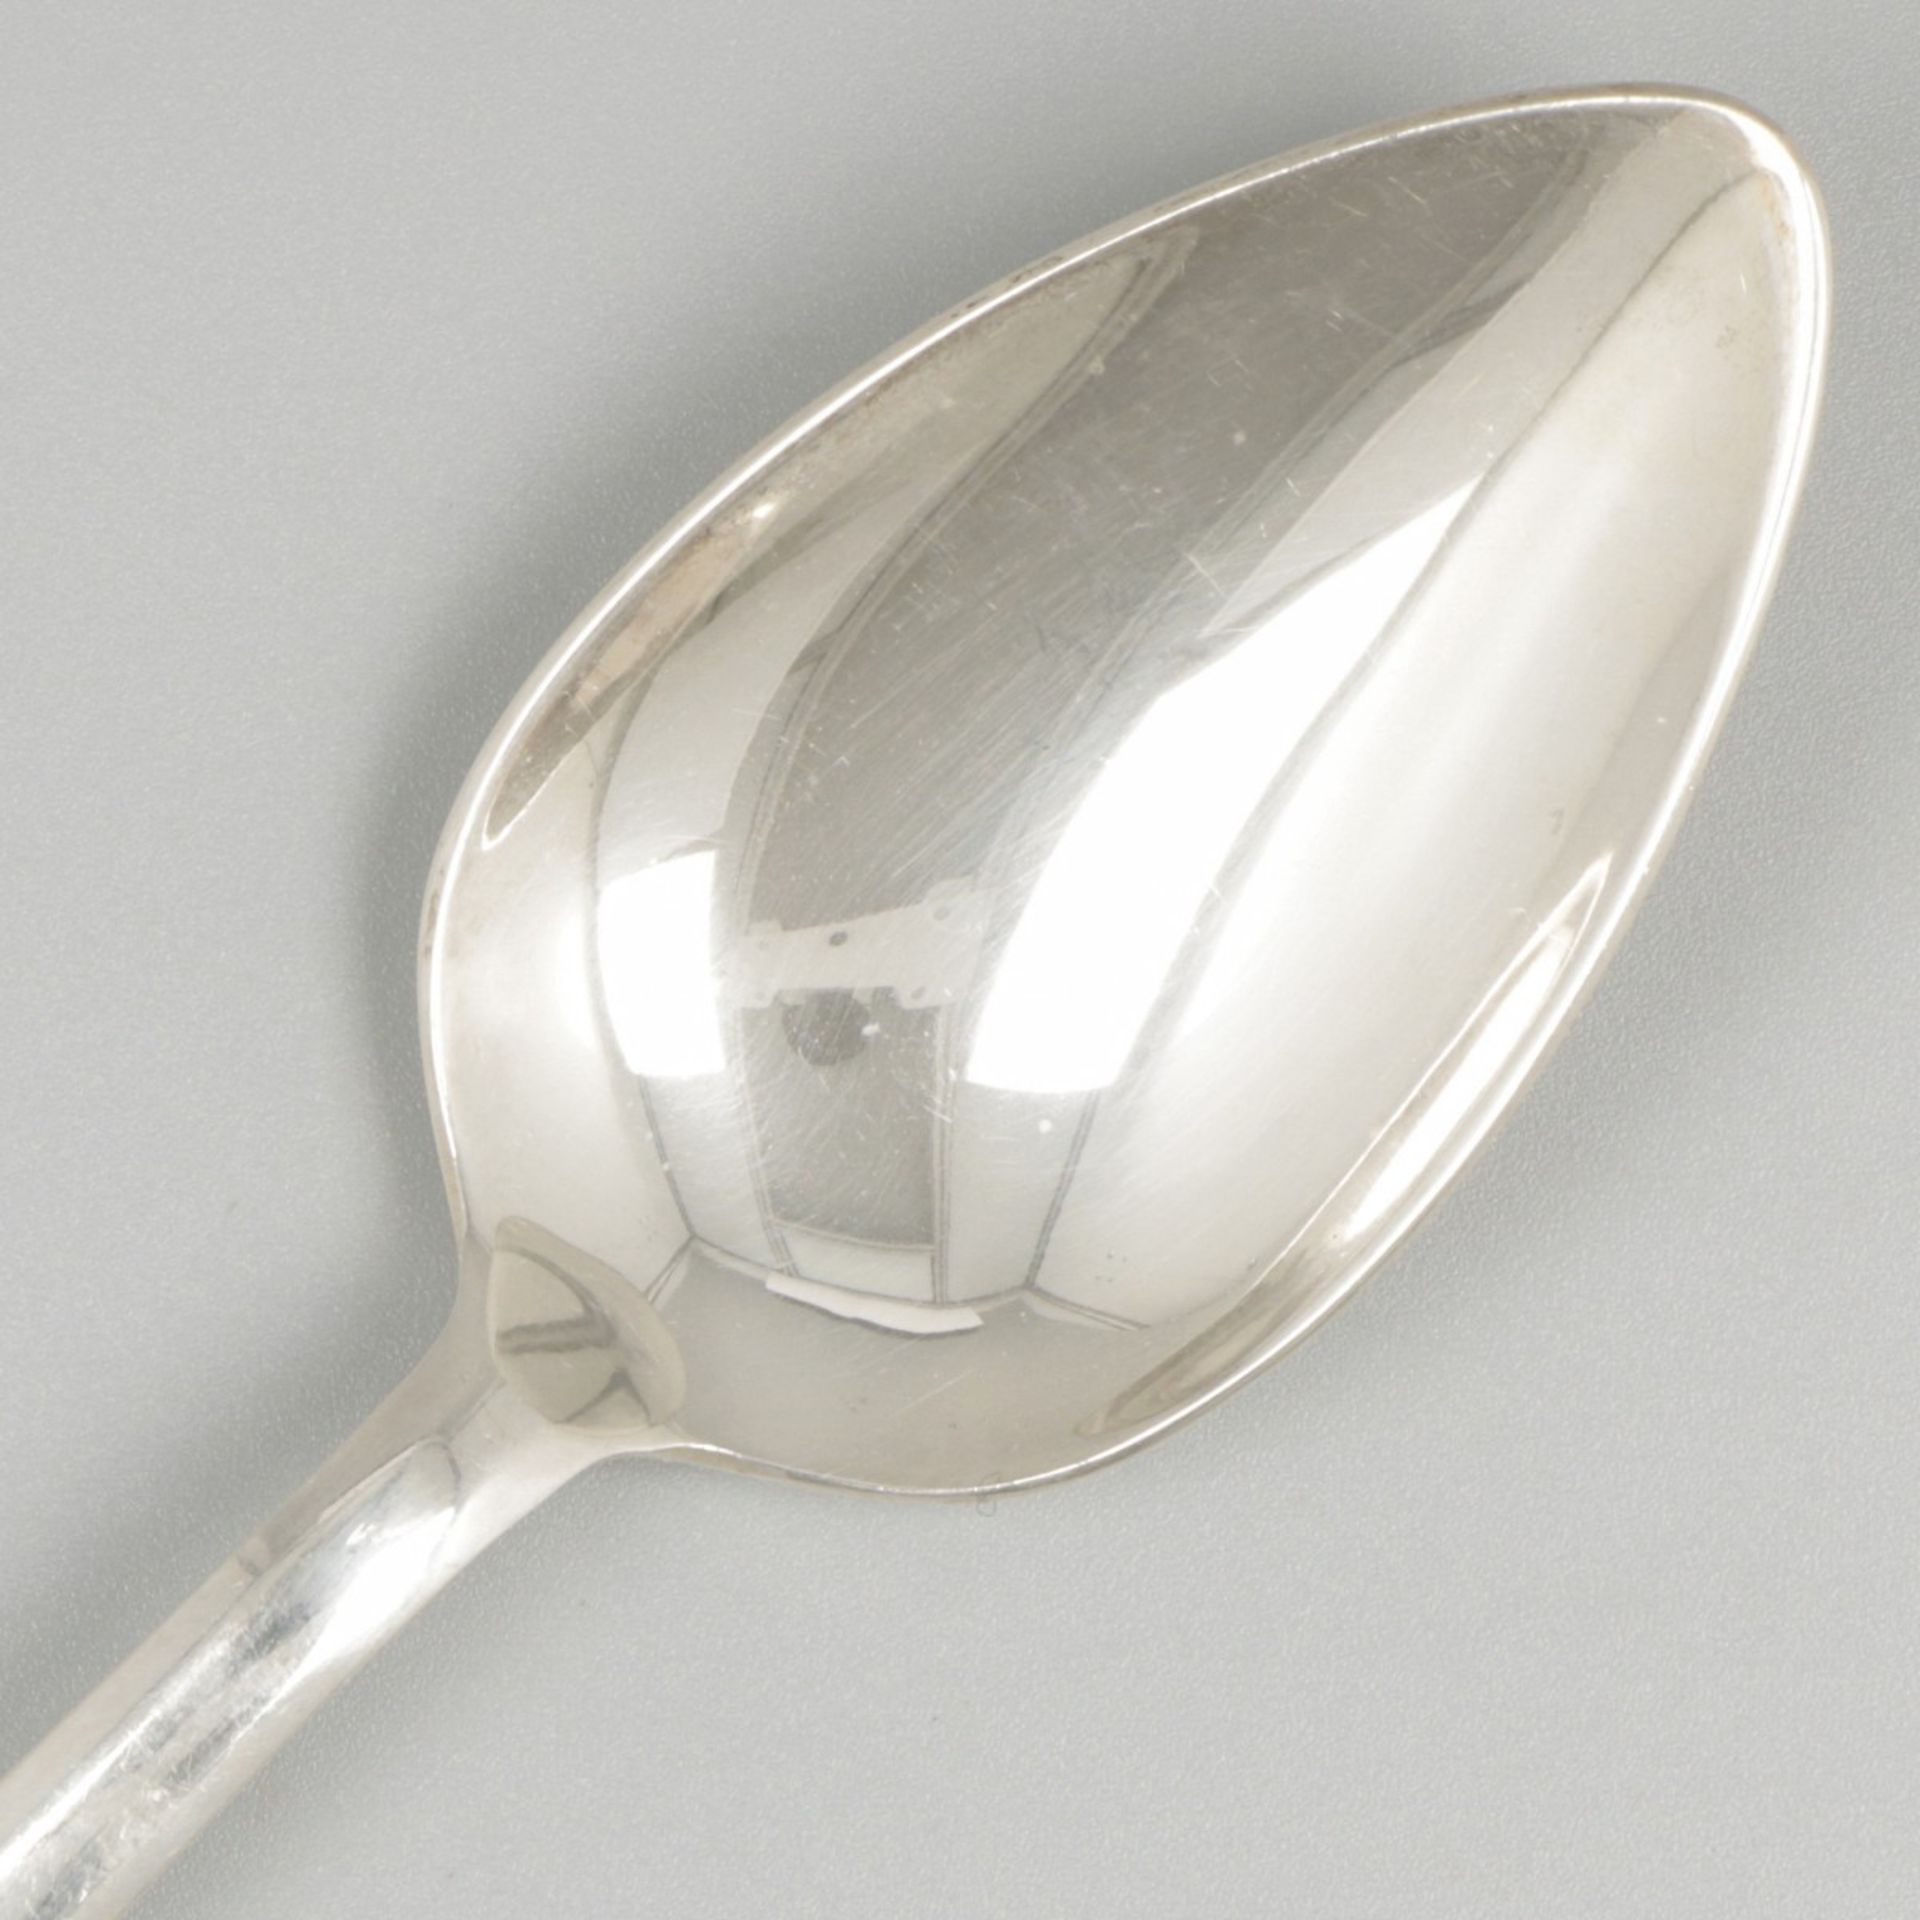 6-piece set of spoons ''Haags Lofje'' silver. - Image 3 of 6